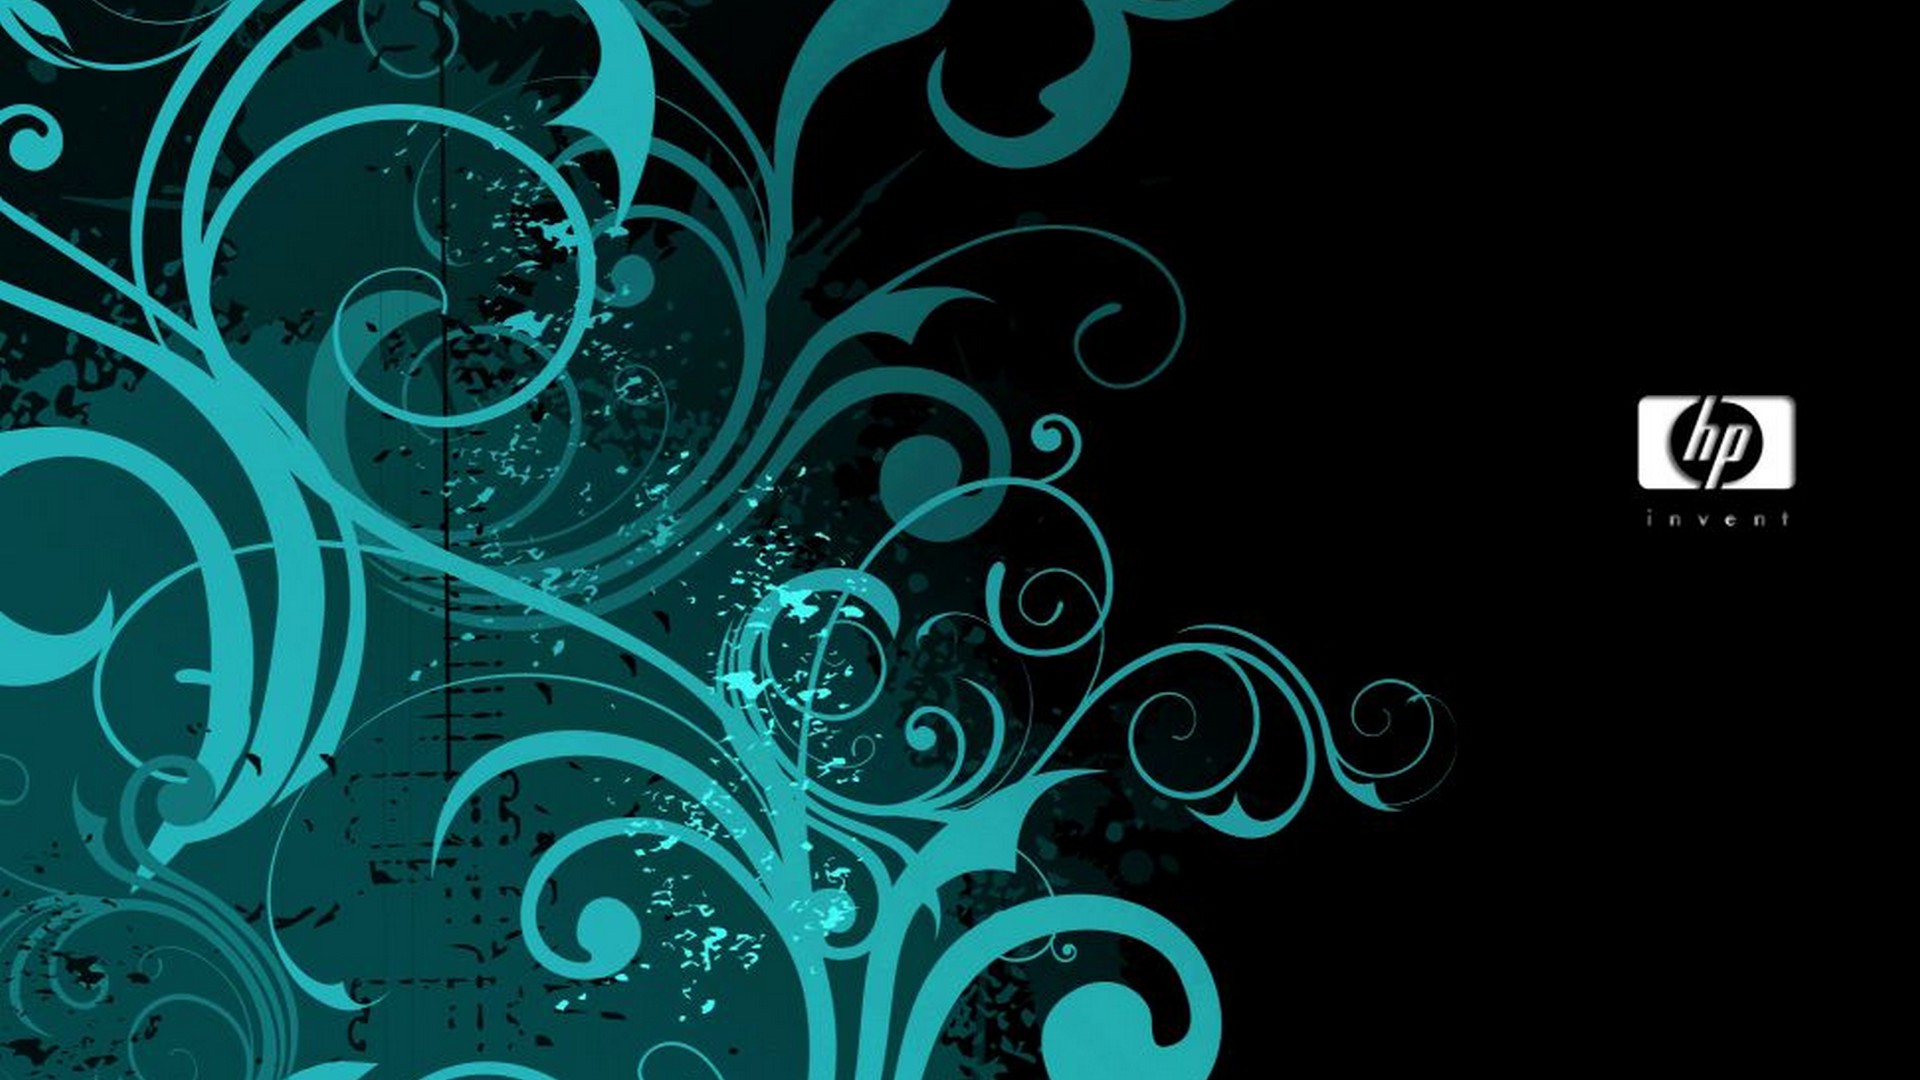 Teal Wallpaper For Desktop with resolution 1920X1080 pixel. You can use this wallpaper as background for your desktop Computer Screensavers, Android or iPhone smartphones